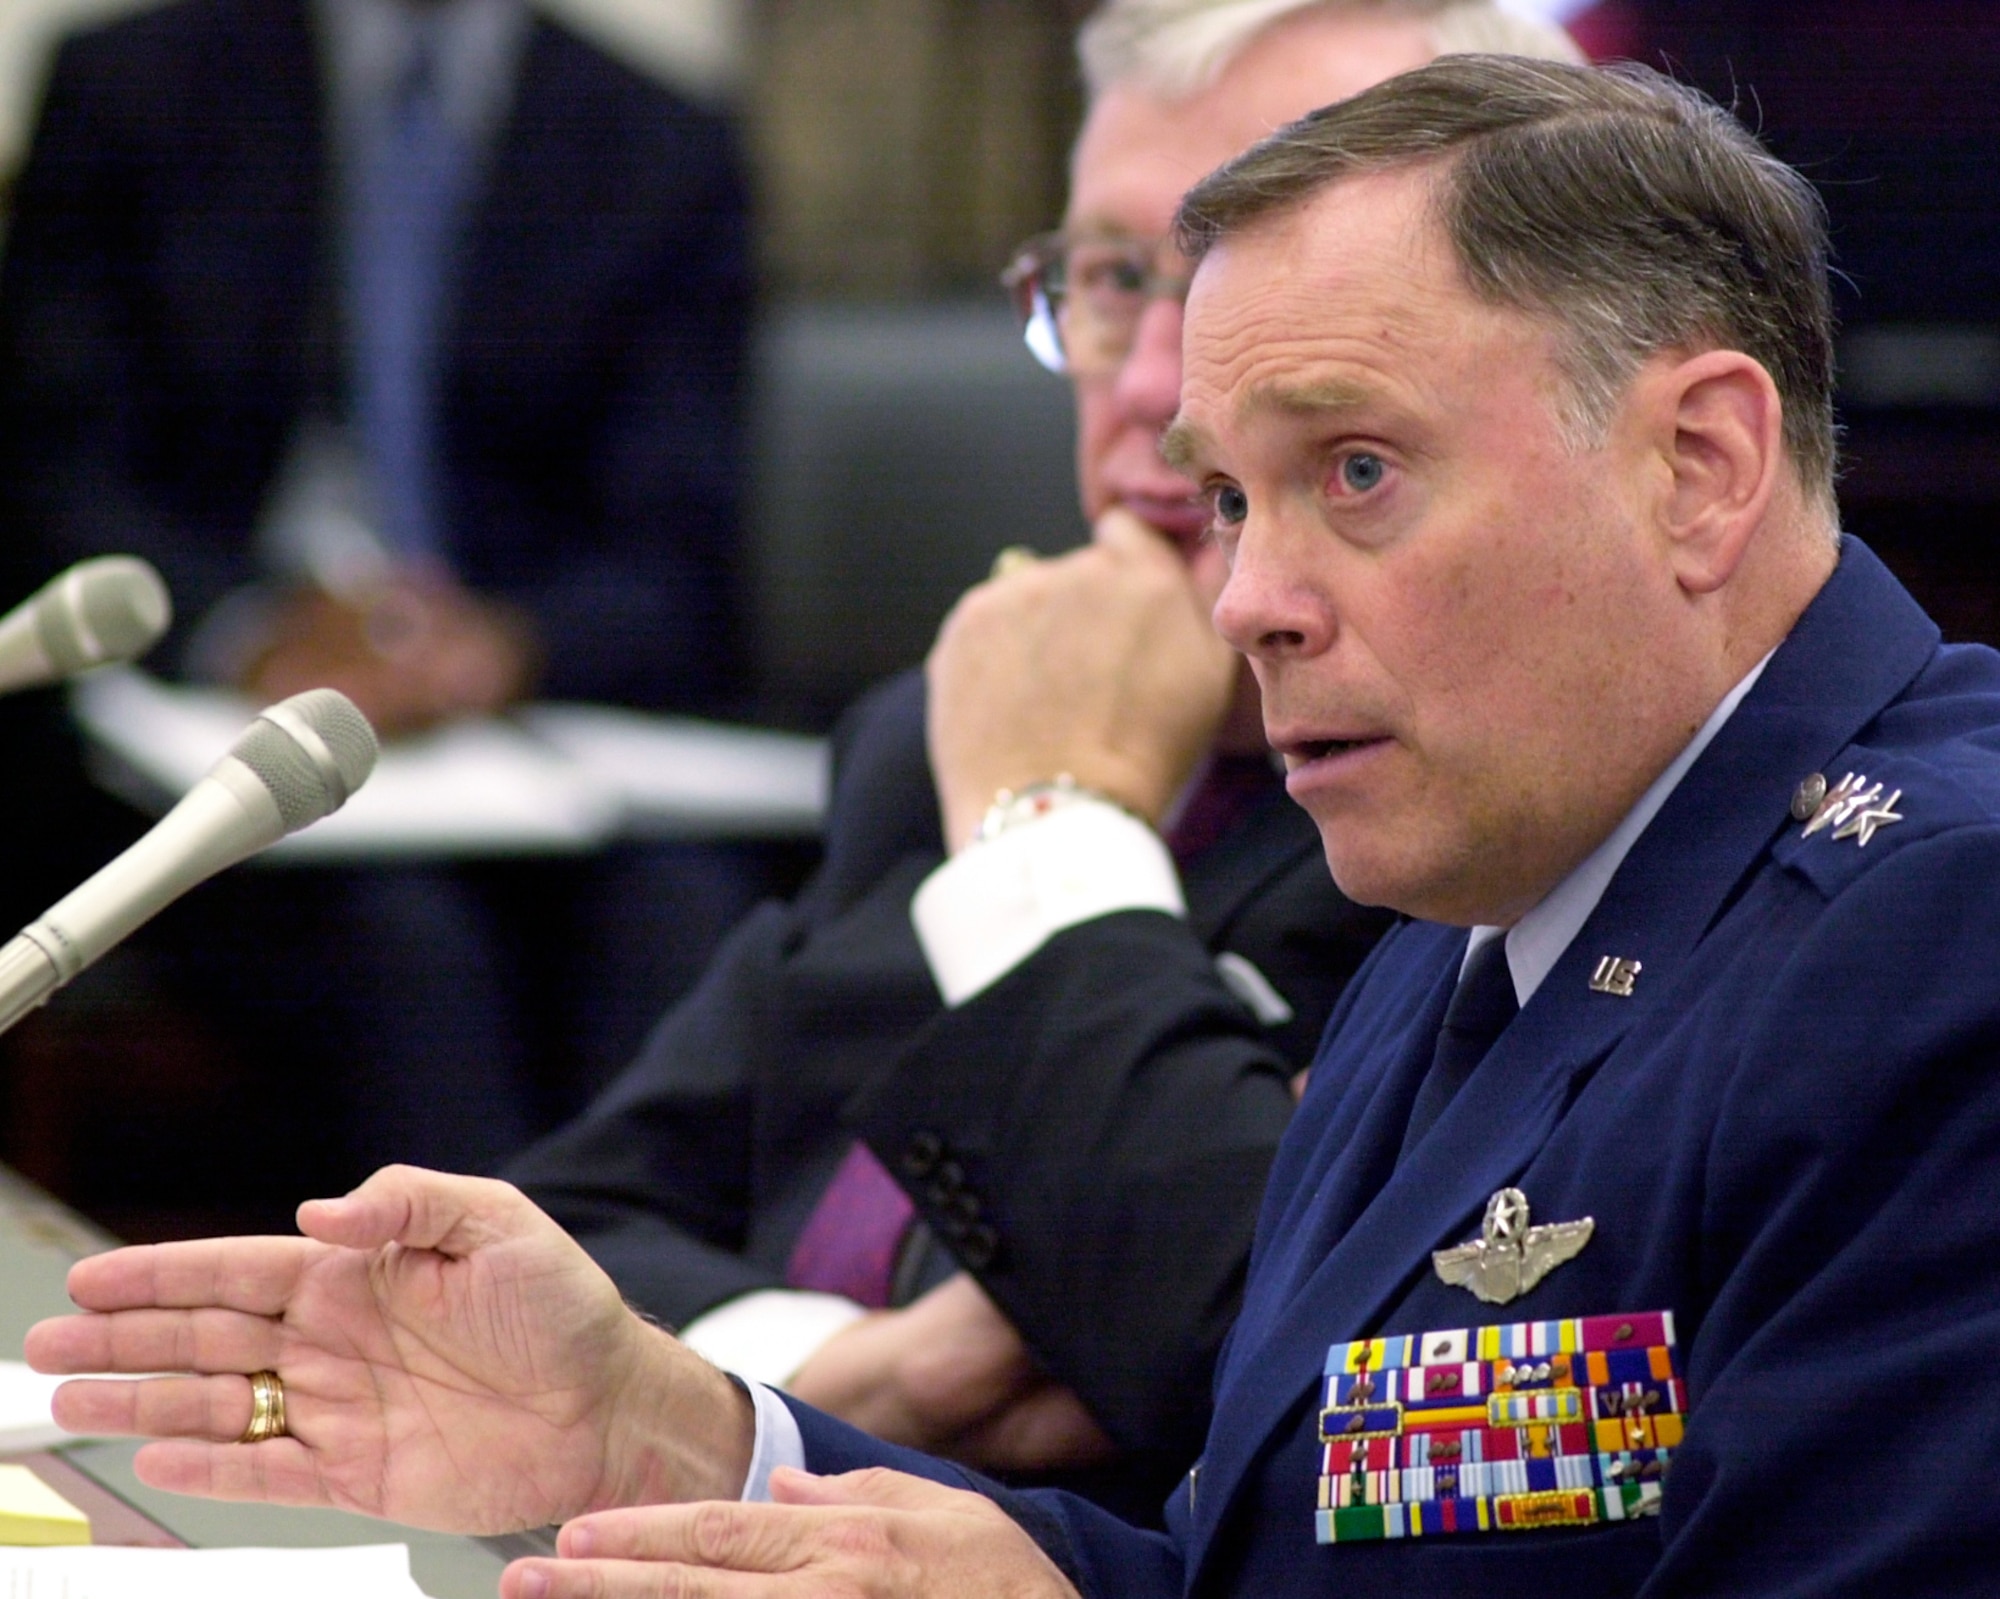 WASHINGTON -- Secretary of the Air Force Dr. James G. Roche looks on as Air Force Chief of Staff Gen. John P. Jumper answers questions during a hearing of the House Appropriations Committee subcommittee on defense on March 19.  (U.S. Air Force photo by Tech. Sgt.  Jim Varhegyi)